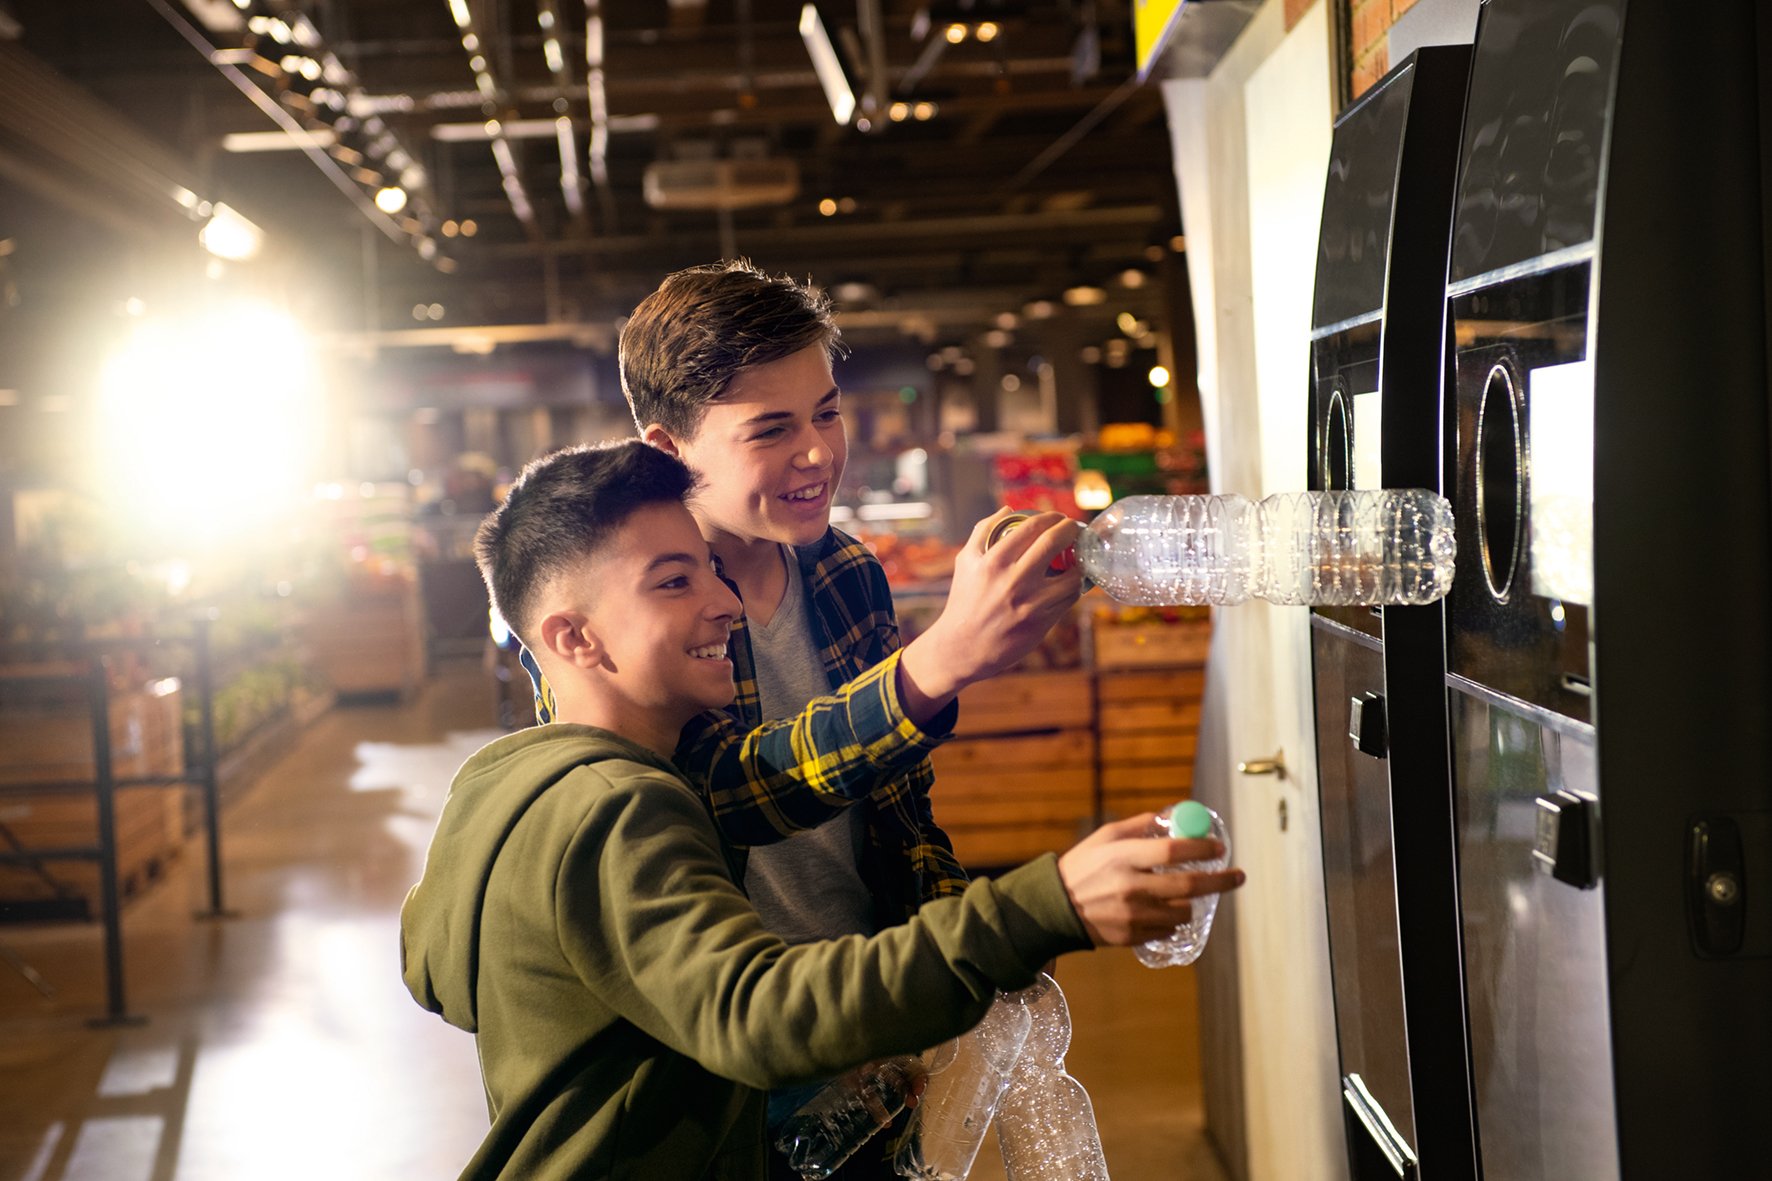 image of kids with reverse vending machine